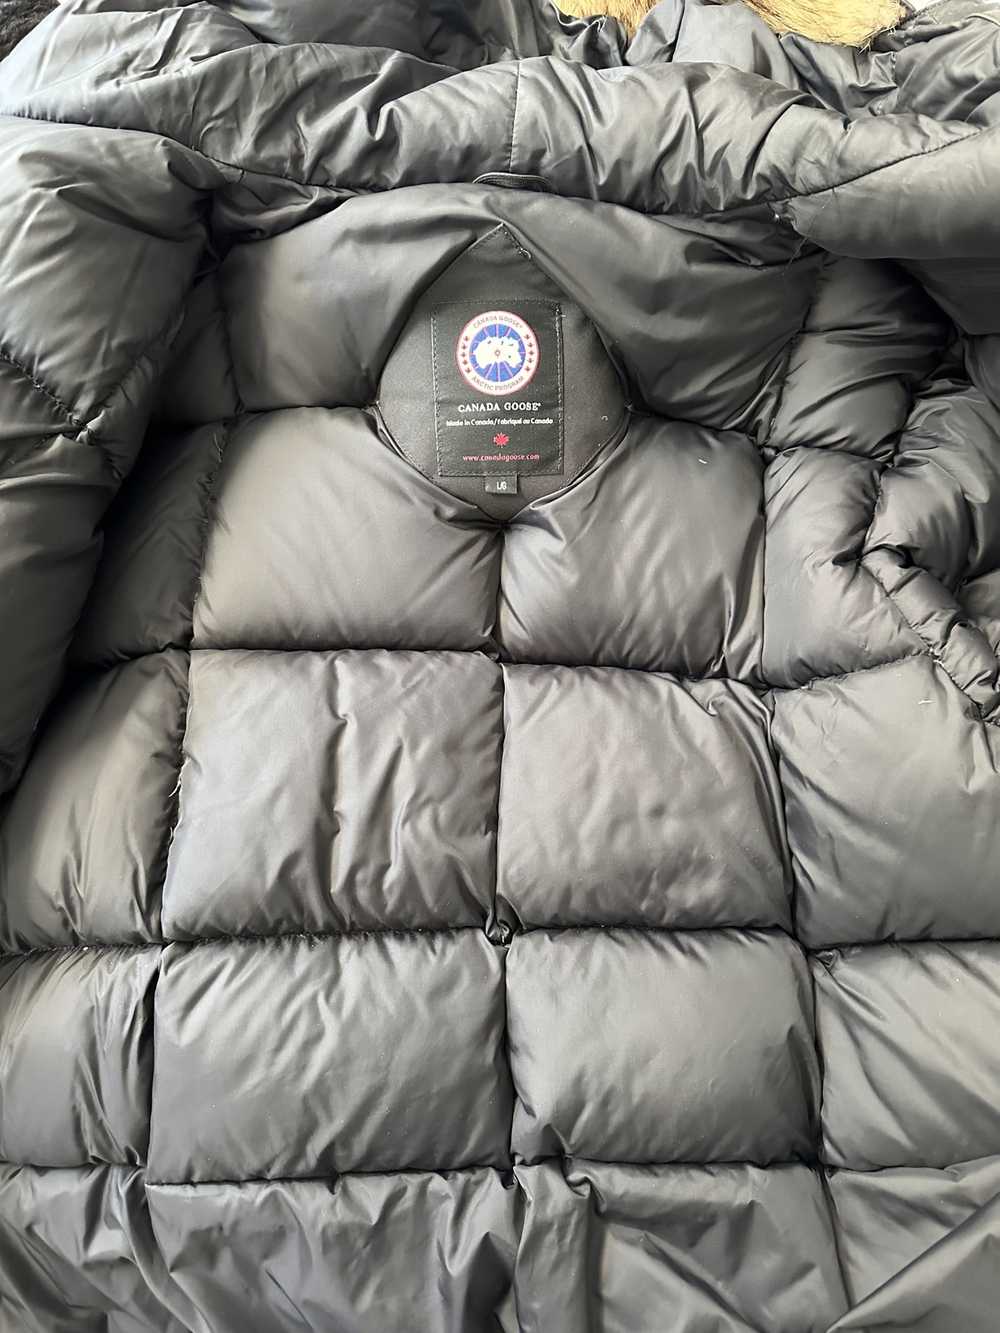 Canada Goose Expedition Parka - image 3